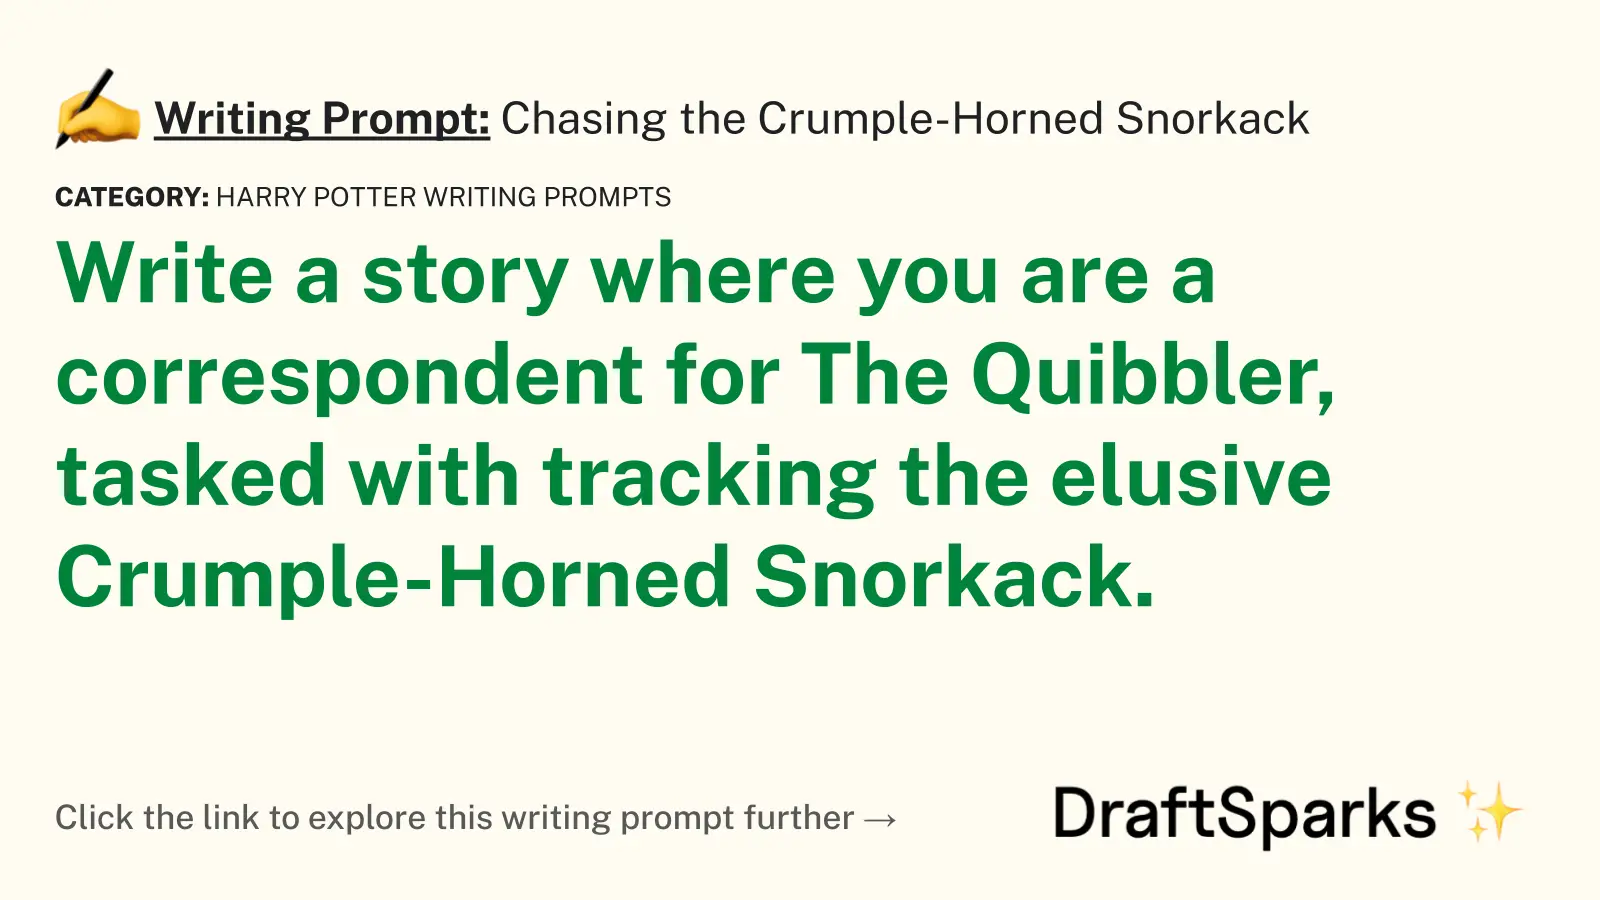 Chasing the Crumple-Horned Snorkack